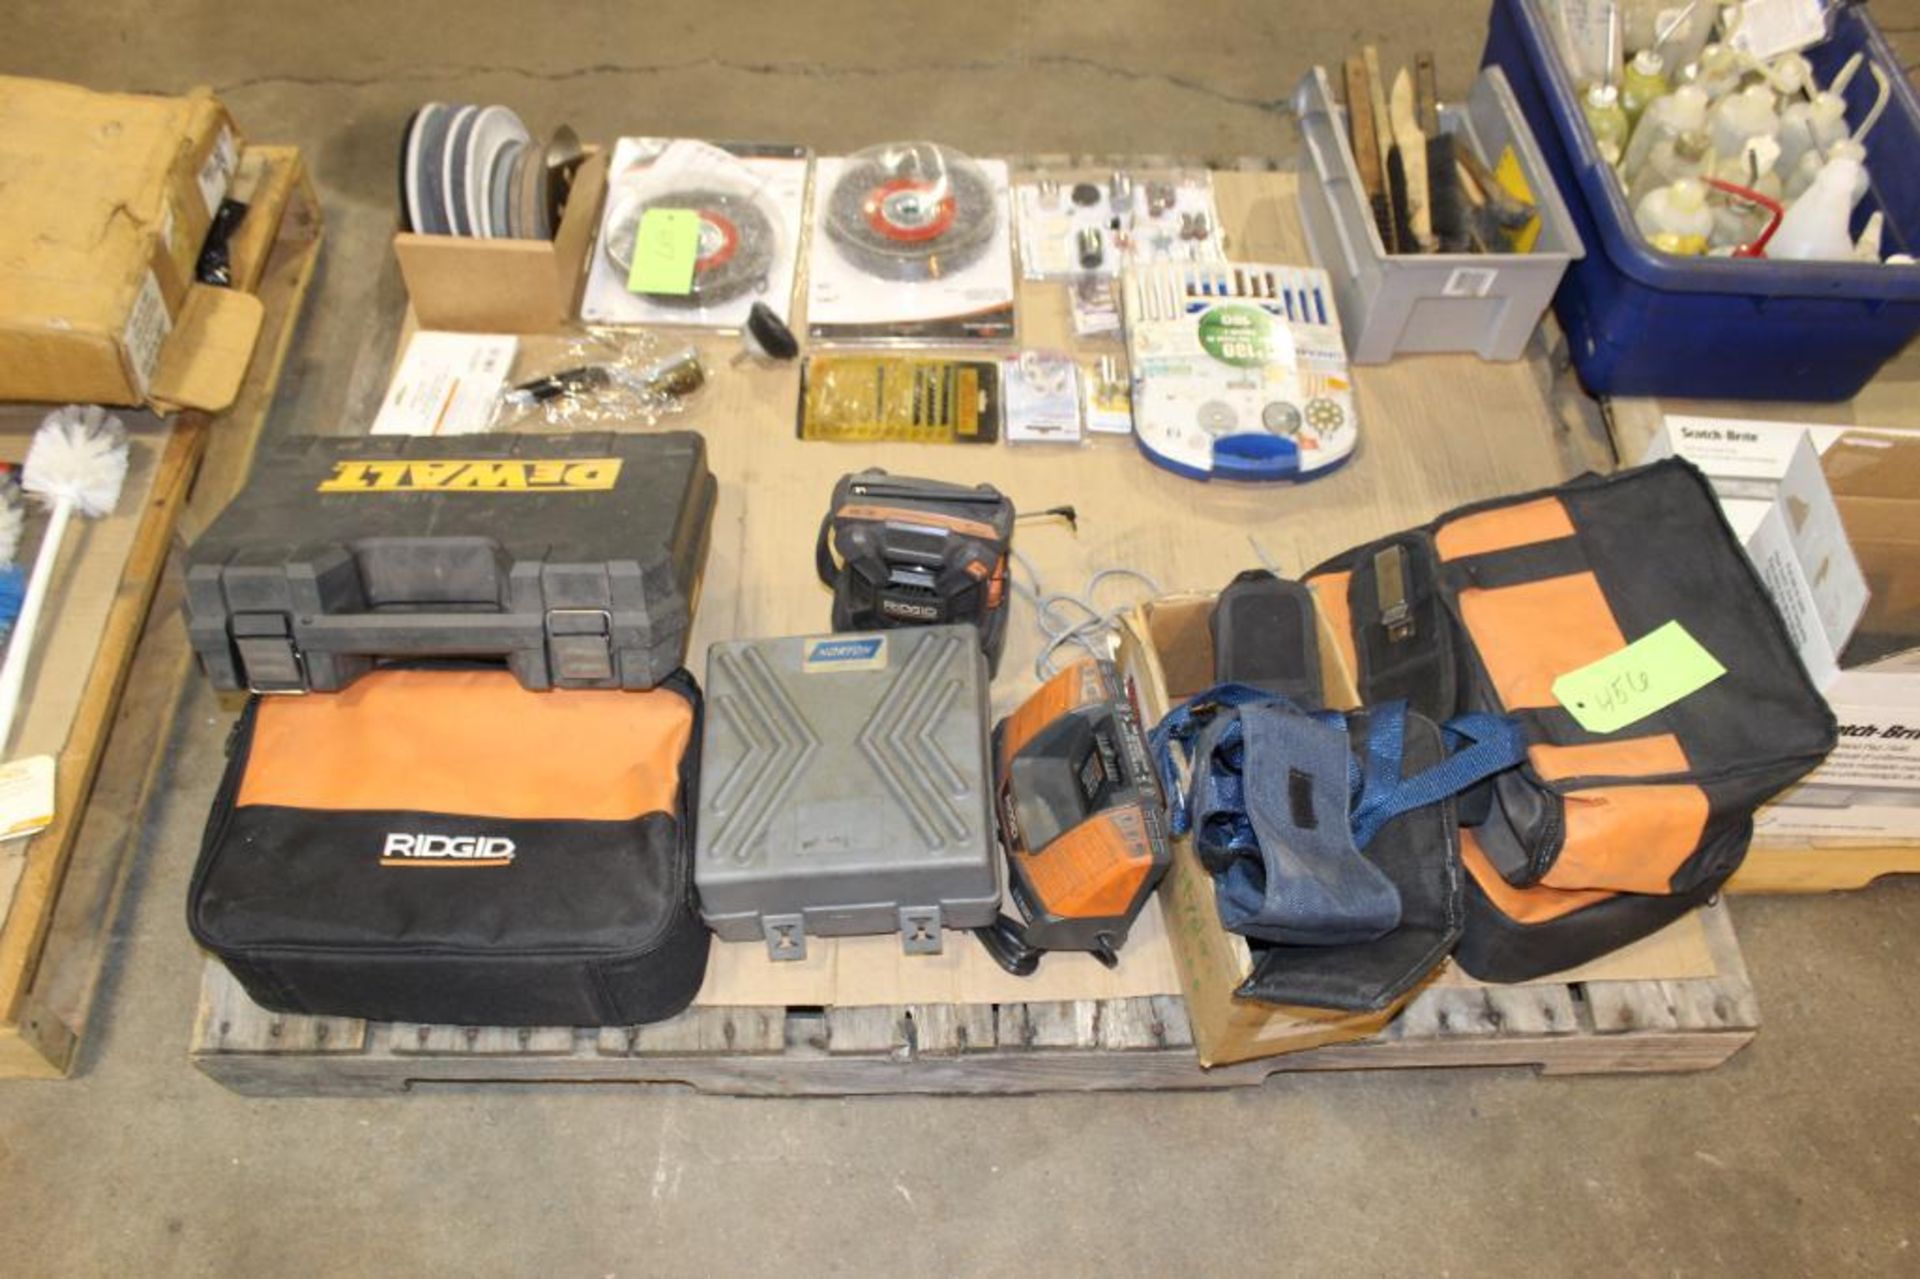 Lot of Ridgid Canvas Bags/Assorted Tool Holders, DeWalt Hardcase with (2) Battery Chargers, Ridgid A